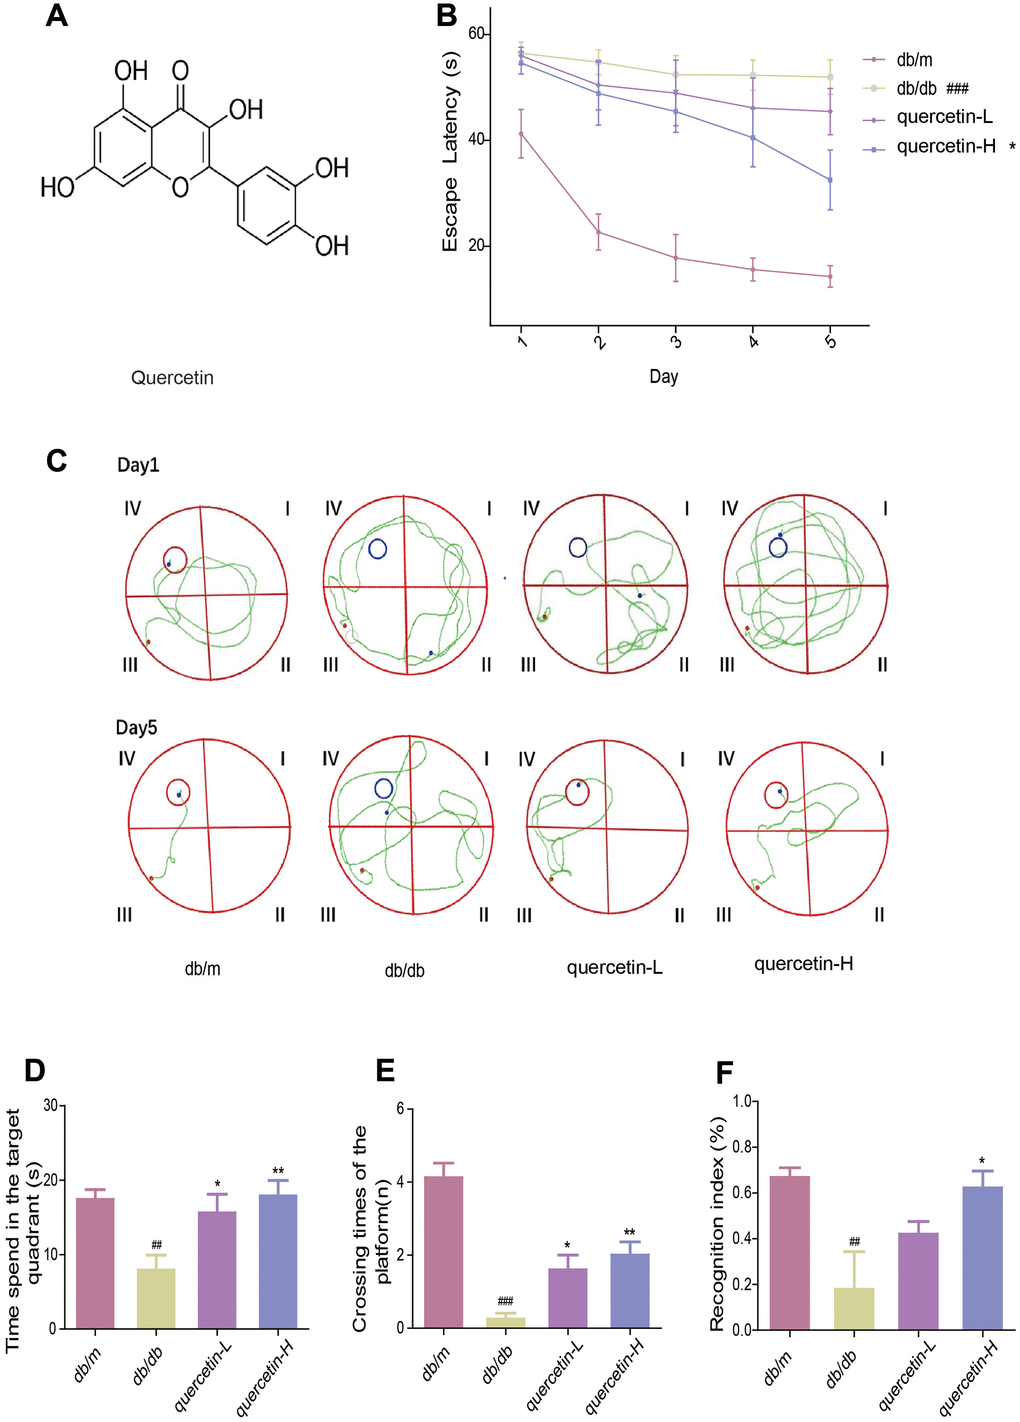 Quercetin improves learning and memory impairment in db/db mice. (A) The chemical structure of Quercetin. (B) Escape latency of the five day in MWM. (C) Swimming paths of the db/db mice on the first and fifth day in MWM. (D) Time spent in the target quadrant in in MWM. (E) Crossing times of the target platform in MWM. (F) Novel object preference index in NOR. Quercetin-L: 35mg/kg/d; Quercetin-H: 70mg/kg/d. Data represent mean ± SEM (n = 10 per group). #p p p p p p 